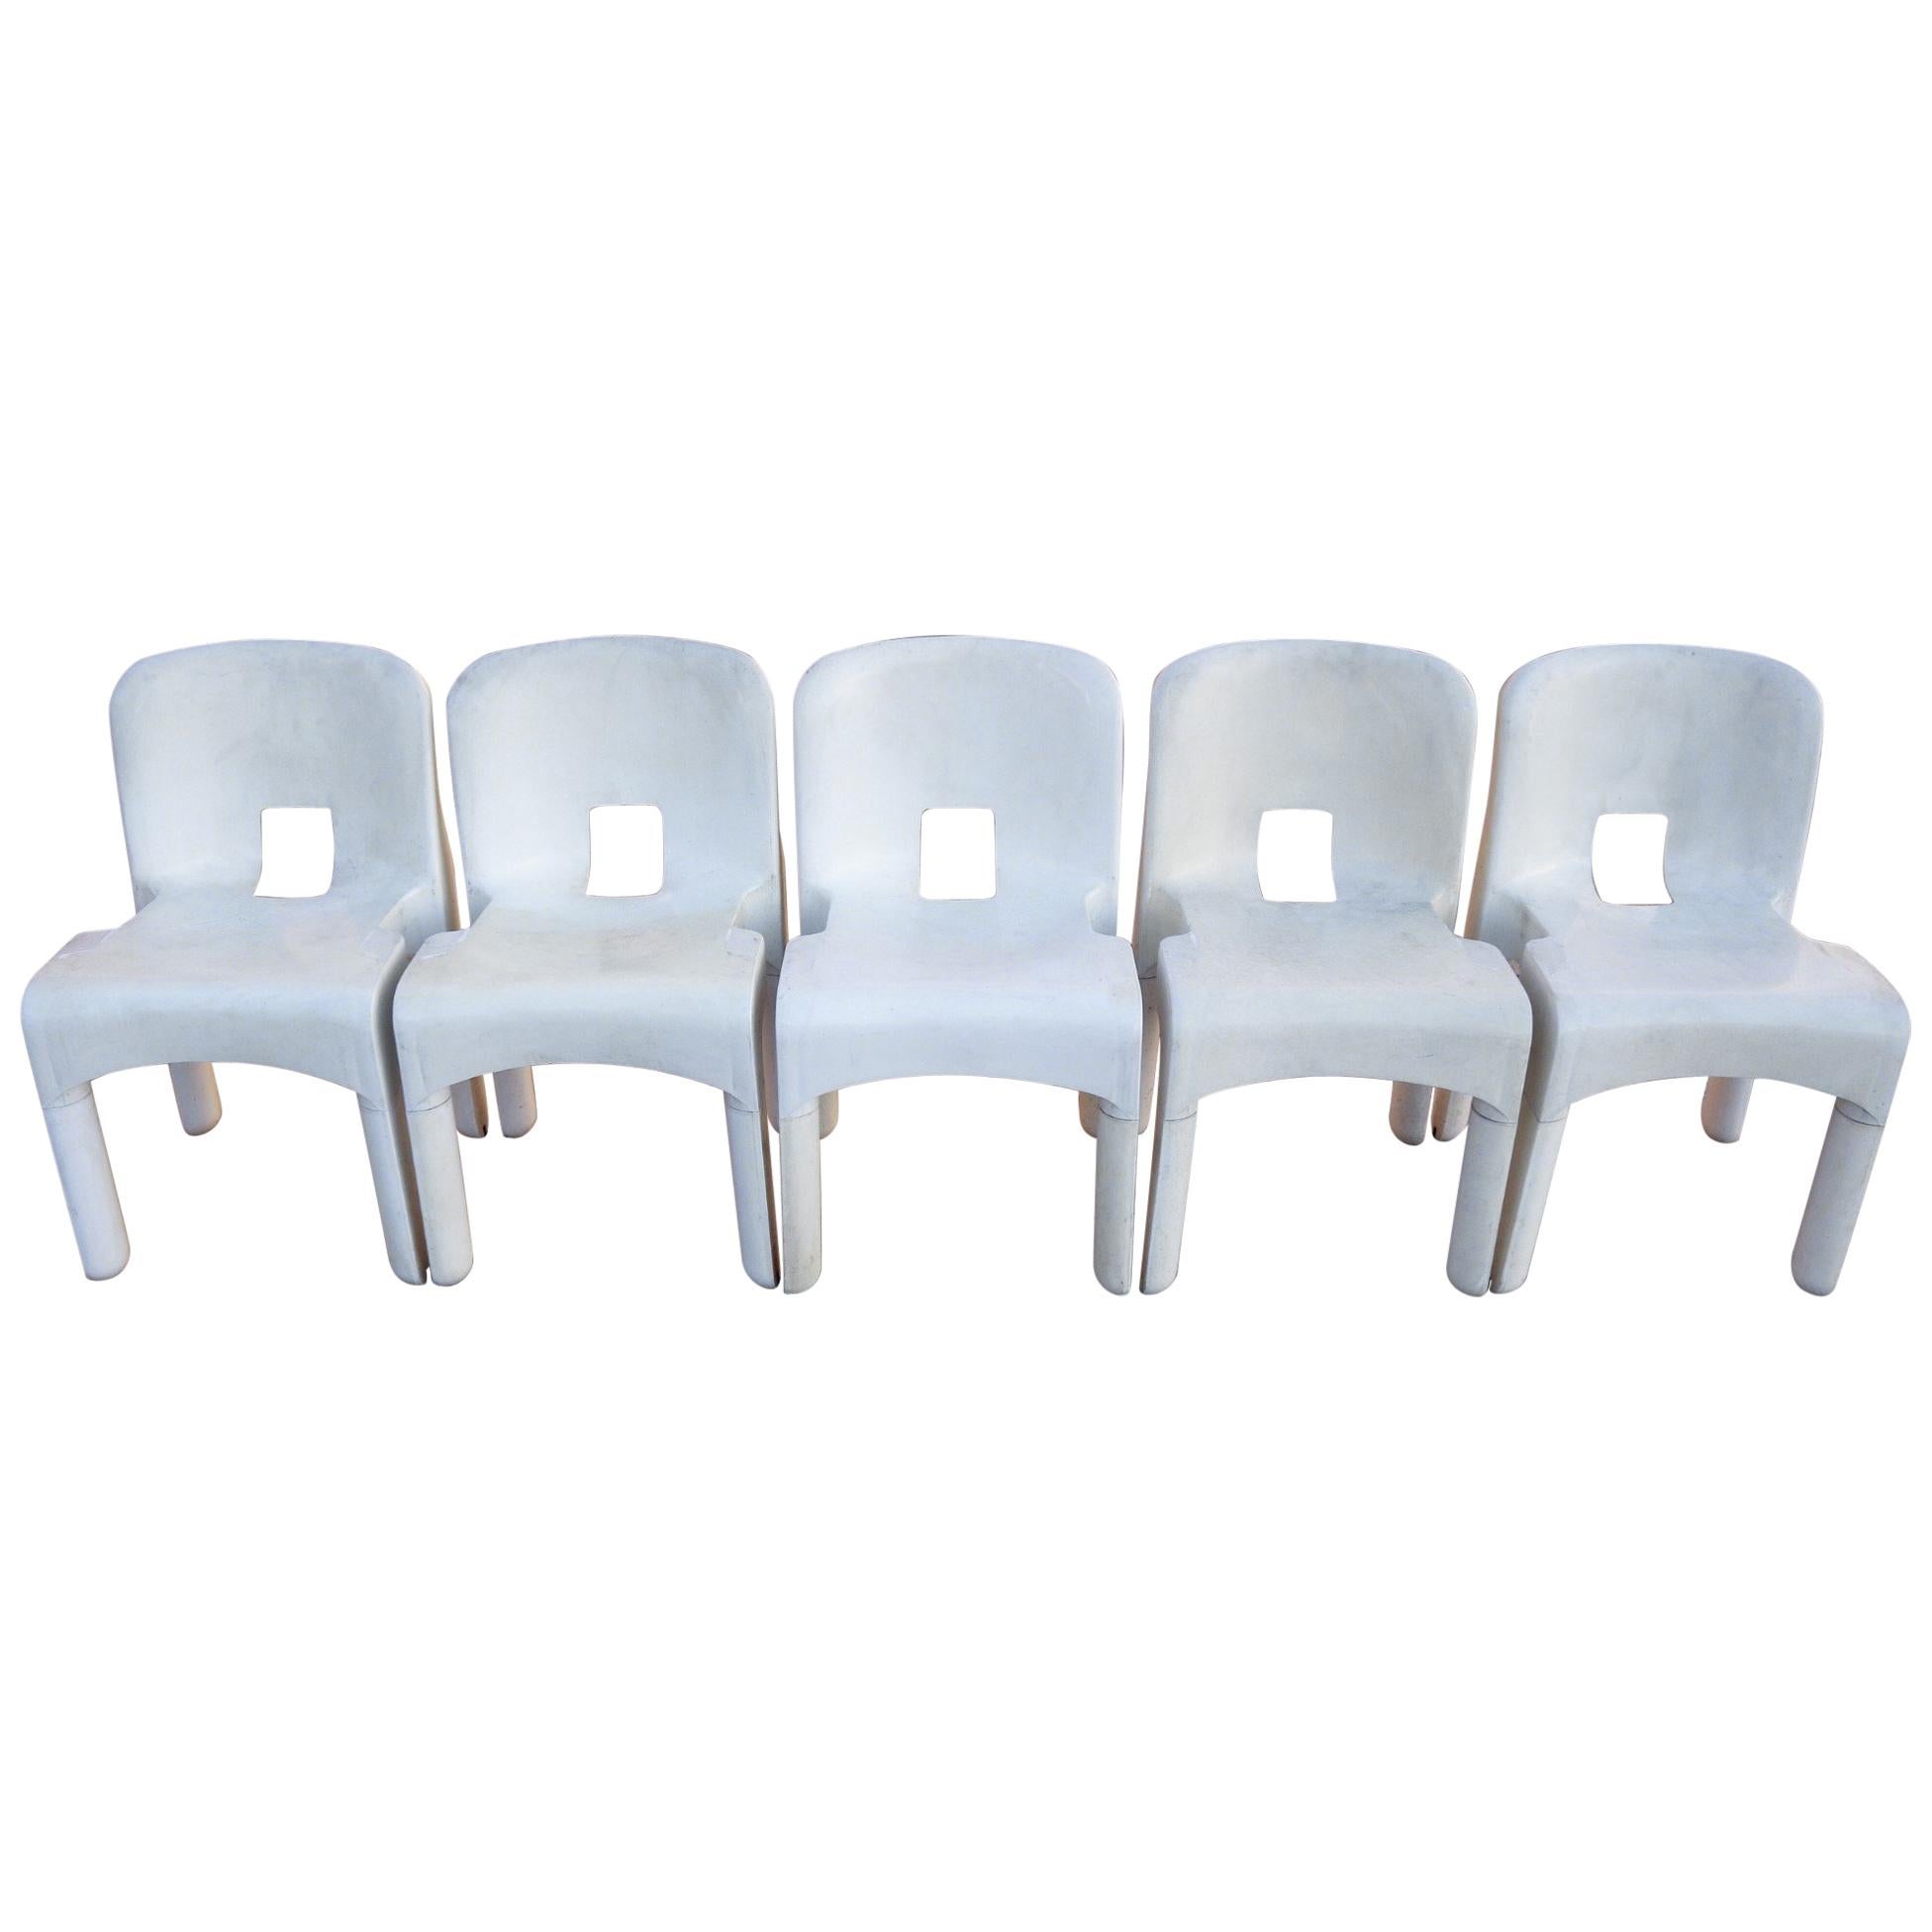 Set of Five Universale Chairs by Joe Colombo for Kartell